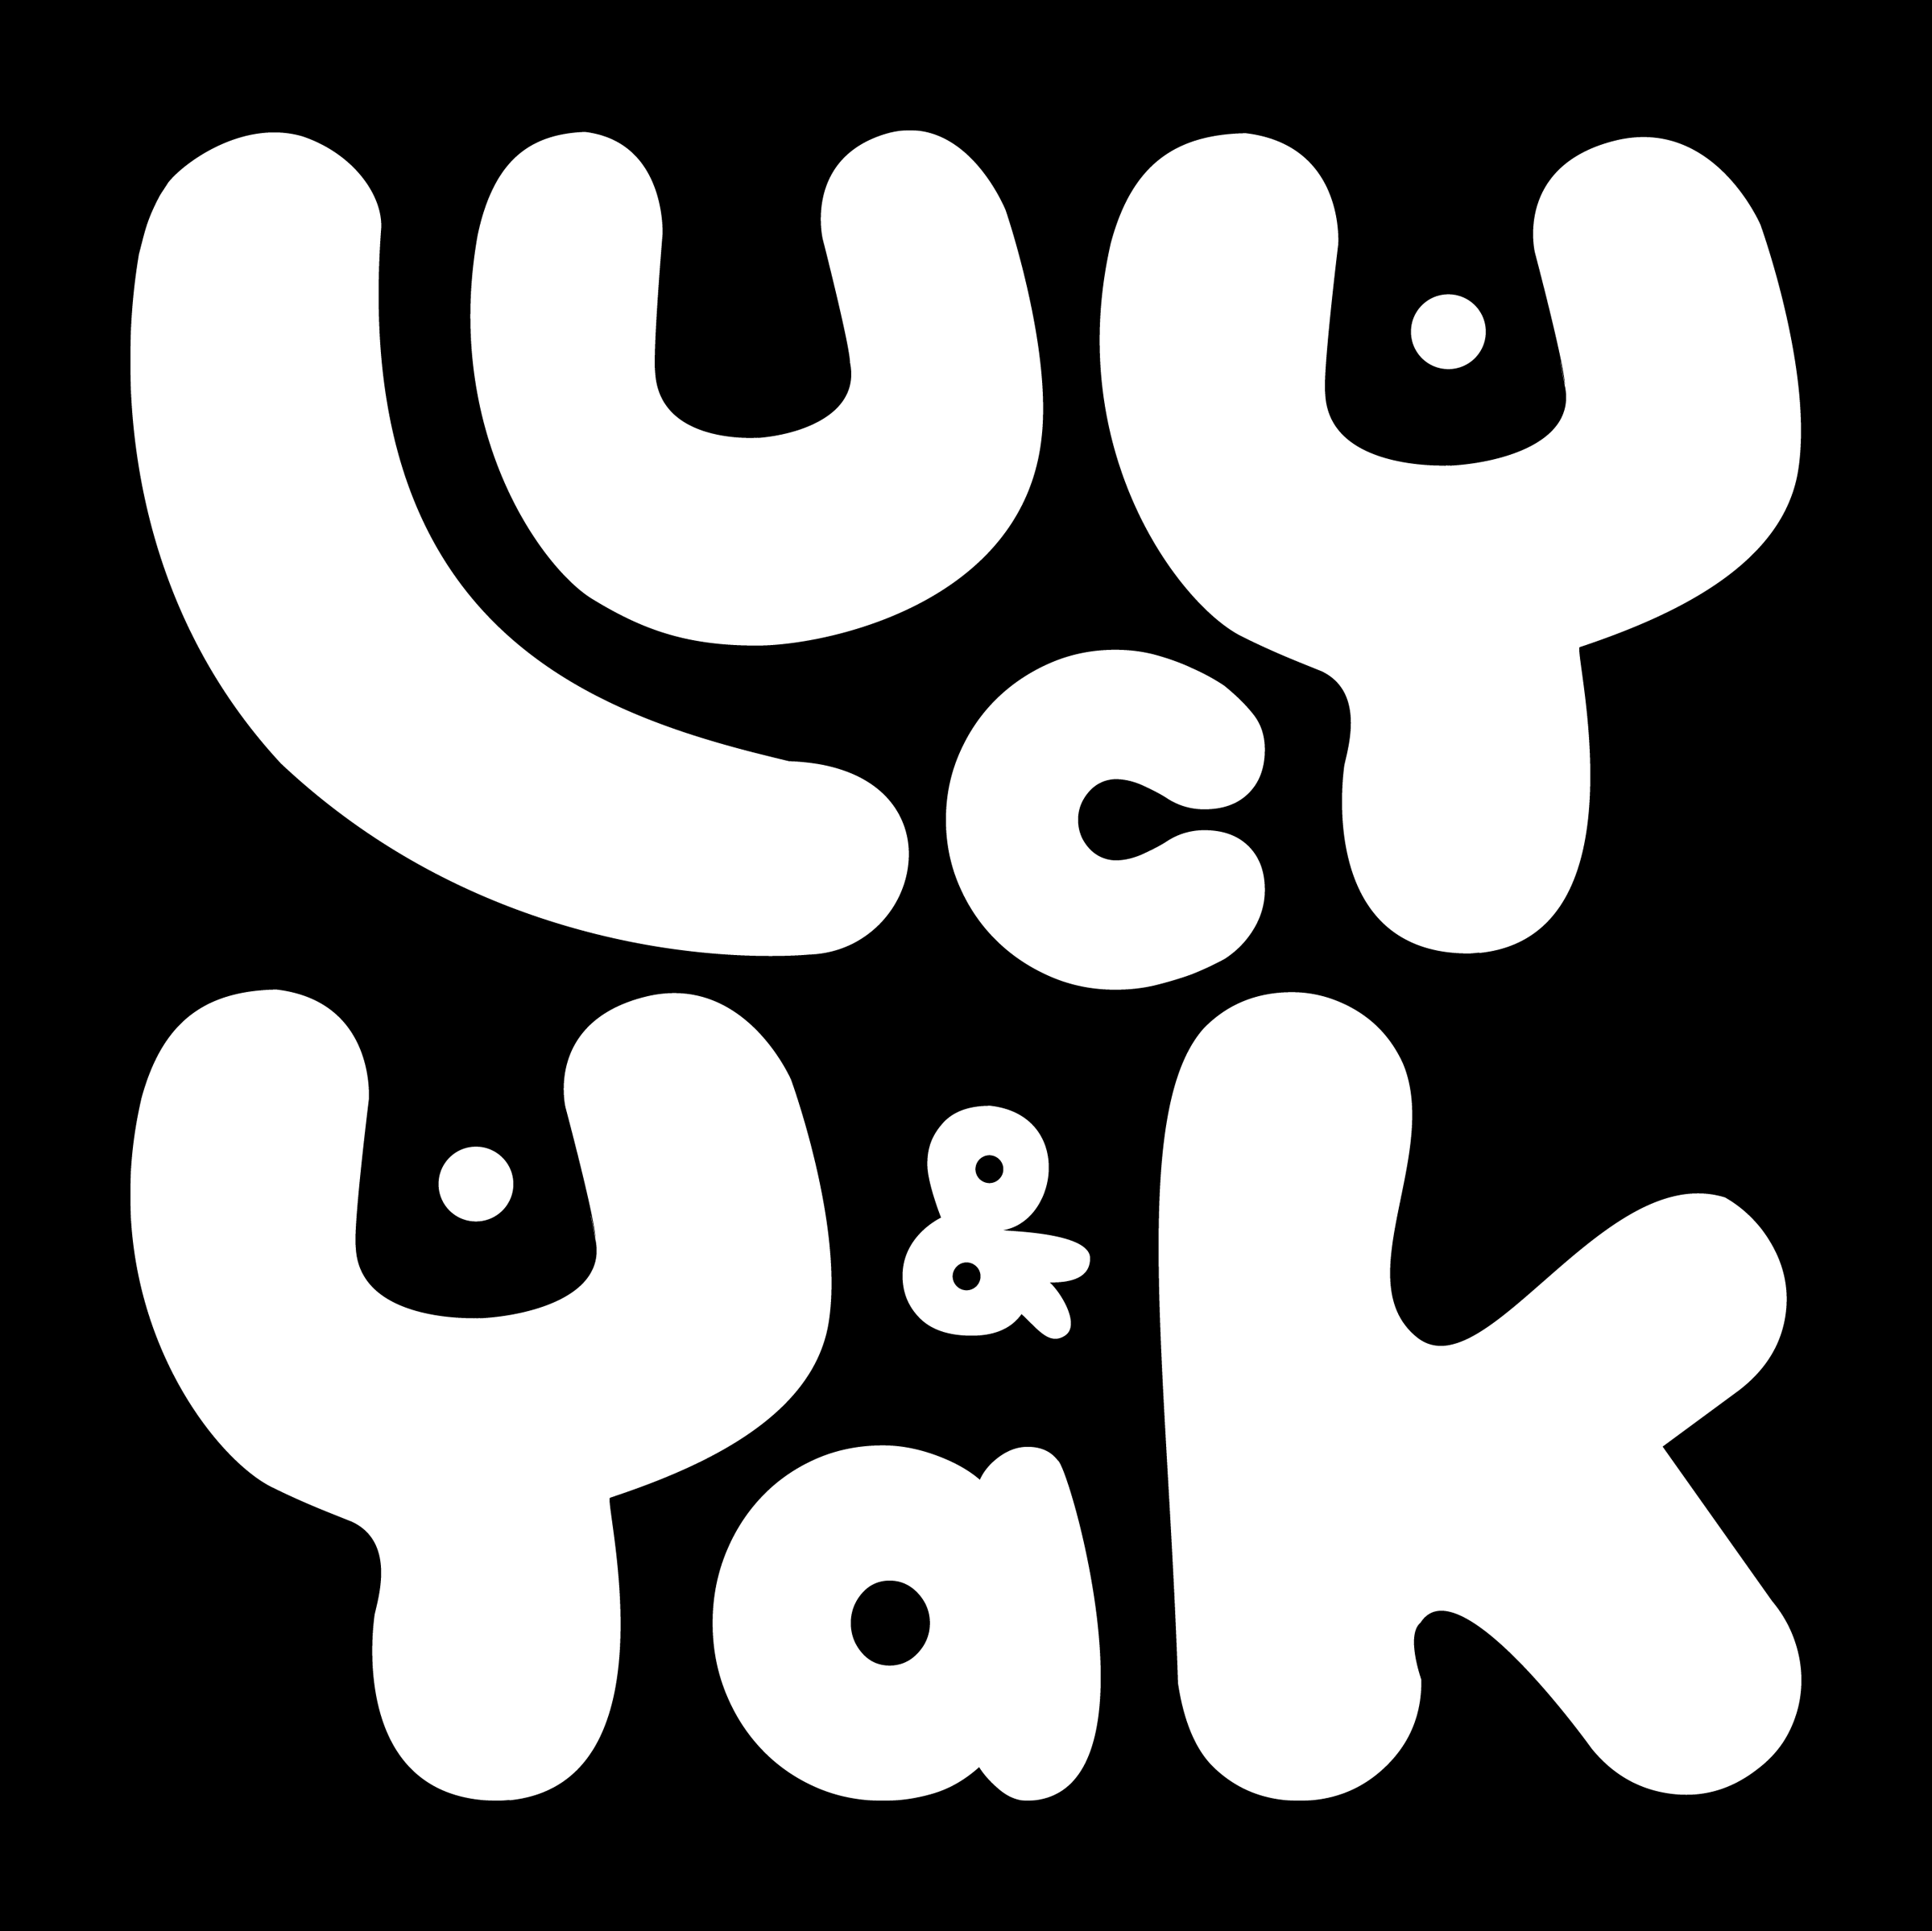 Lucy and Yak logo - white text on black background